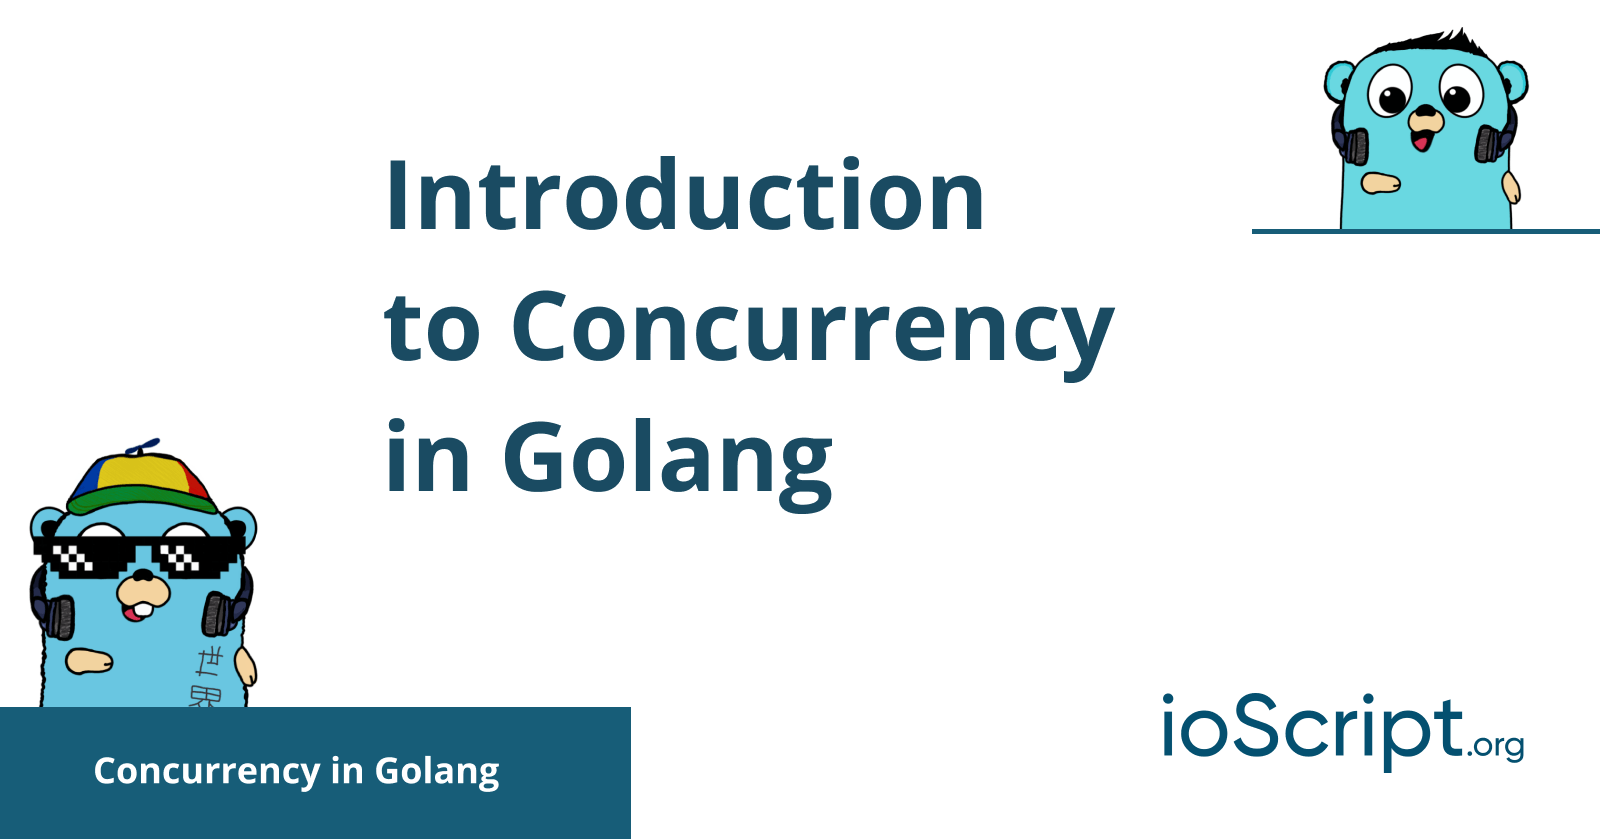 Introduction to Concurrency in Golang